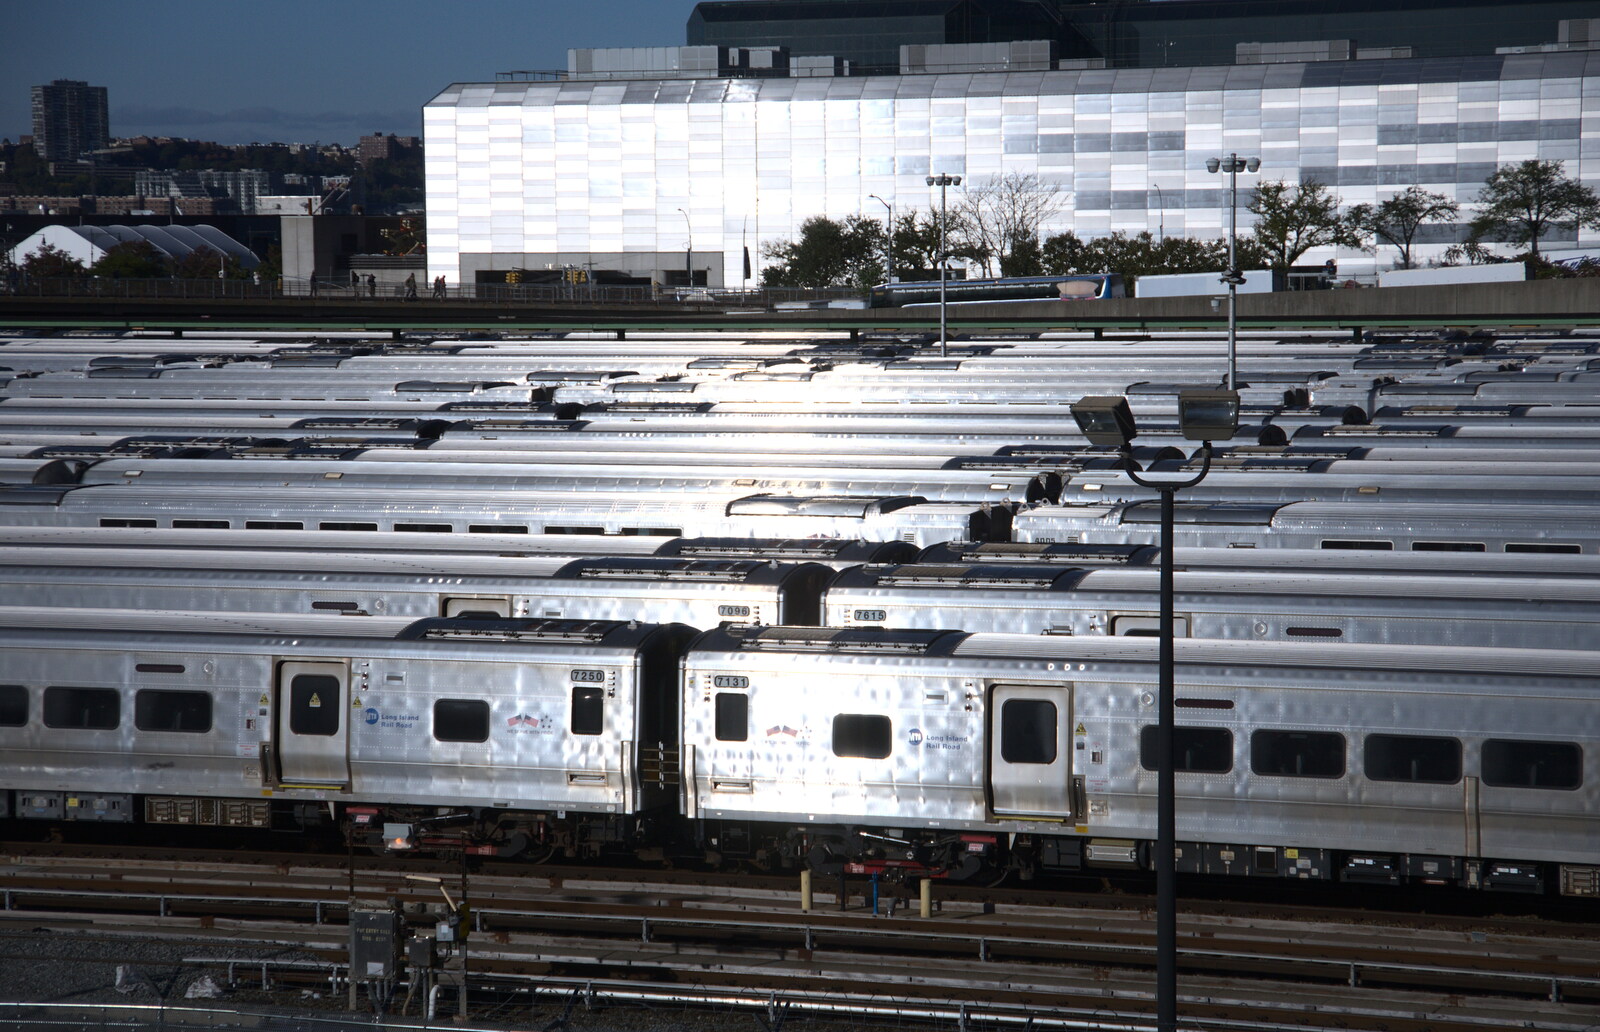 Stacks of silver train carriages from Times Square, USS Intrepid and the High Line, Manhattan, New York - 25th October 2018